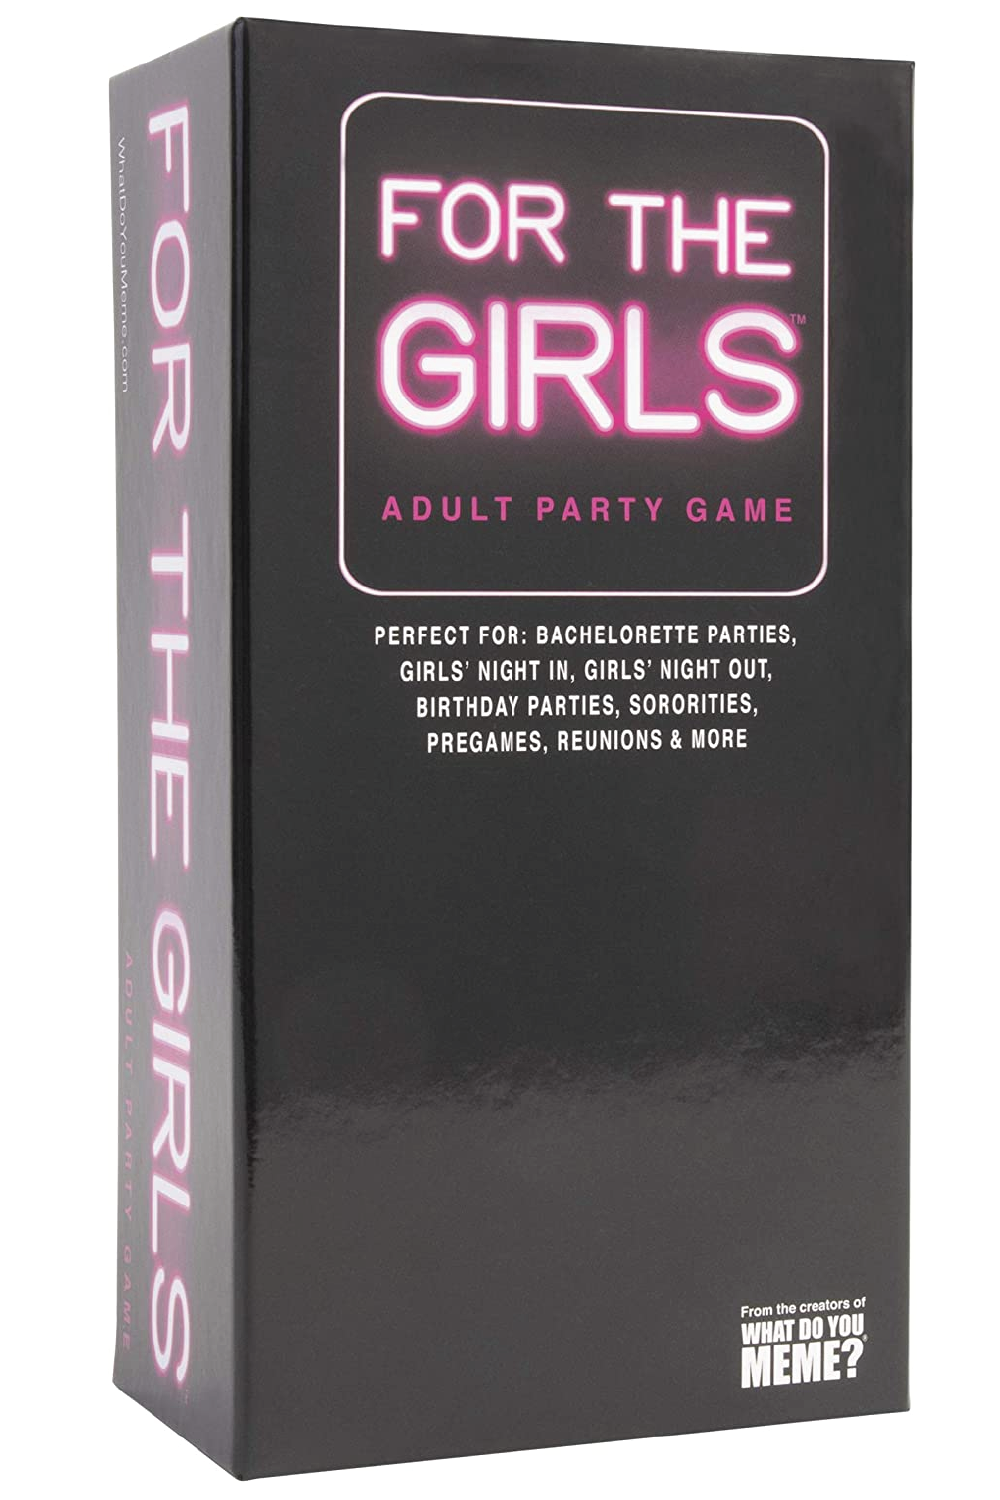 CHOOSE FROM LOTS OF DIFFERENT AMAZING 18 GAMES NSFW ADULT PARTY GAMES 